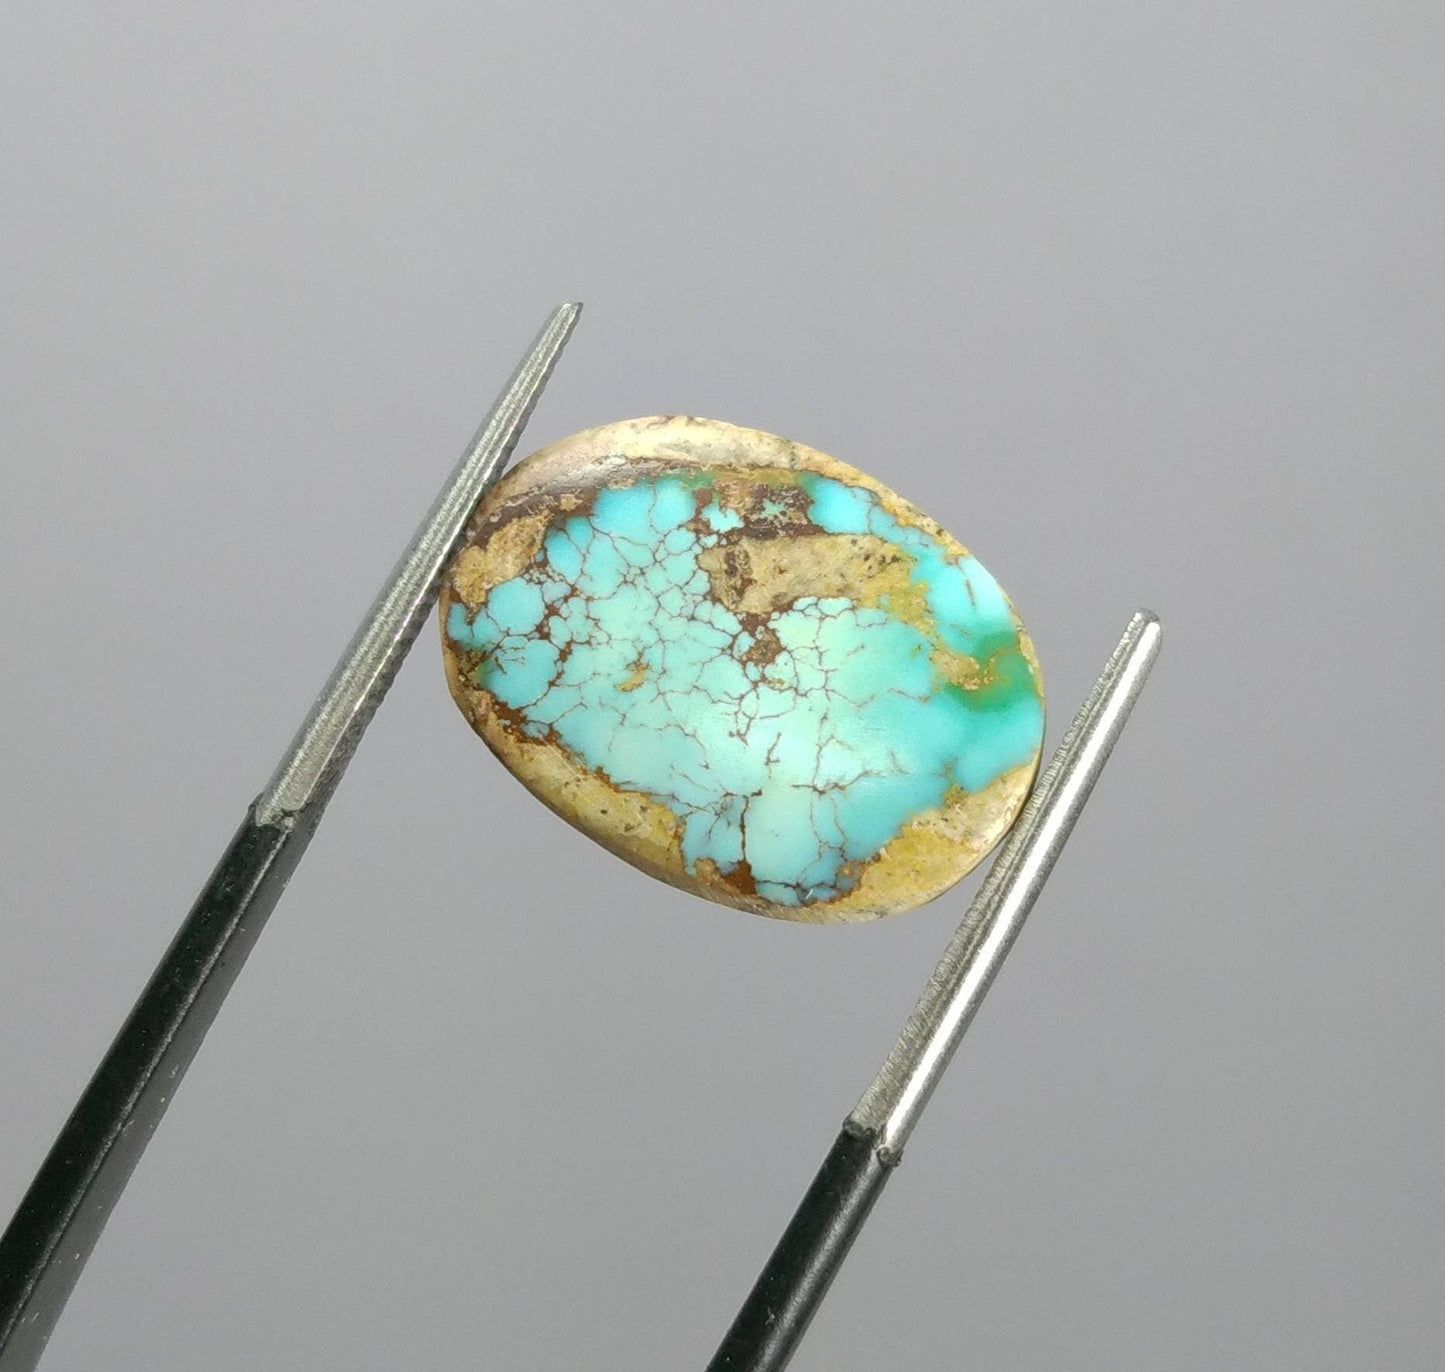 ARSAA GEMS AND MINERALSNatural good quality beautiful 5.5 carat oval shape untreated unheated turquoise cabochon - Premium  from ARSAA GEMS AND MINERALS - Just $6.00! Shop now at ARSAA GEMS AND MINERALS